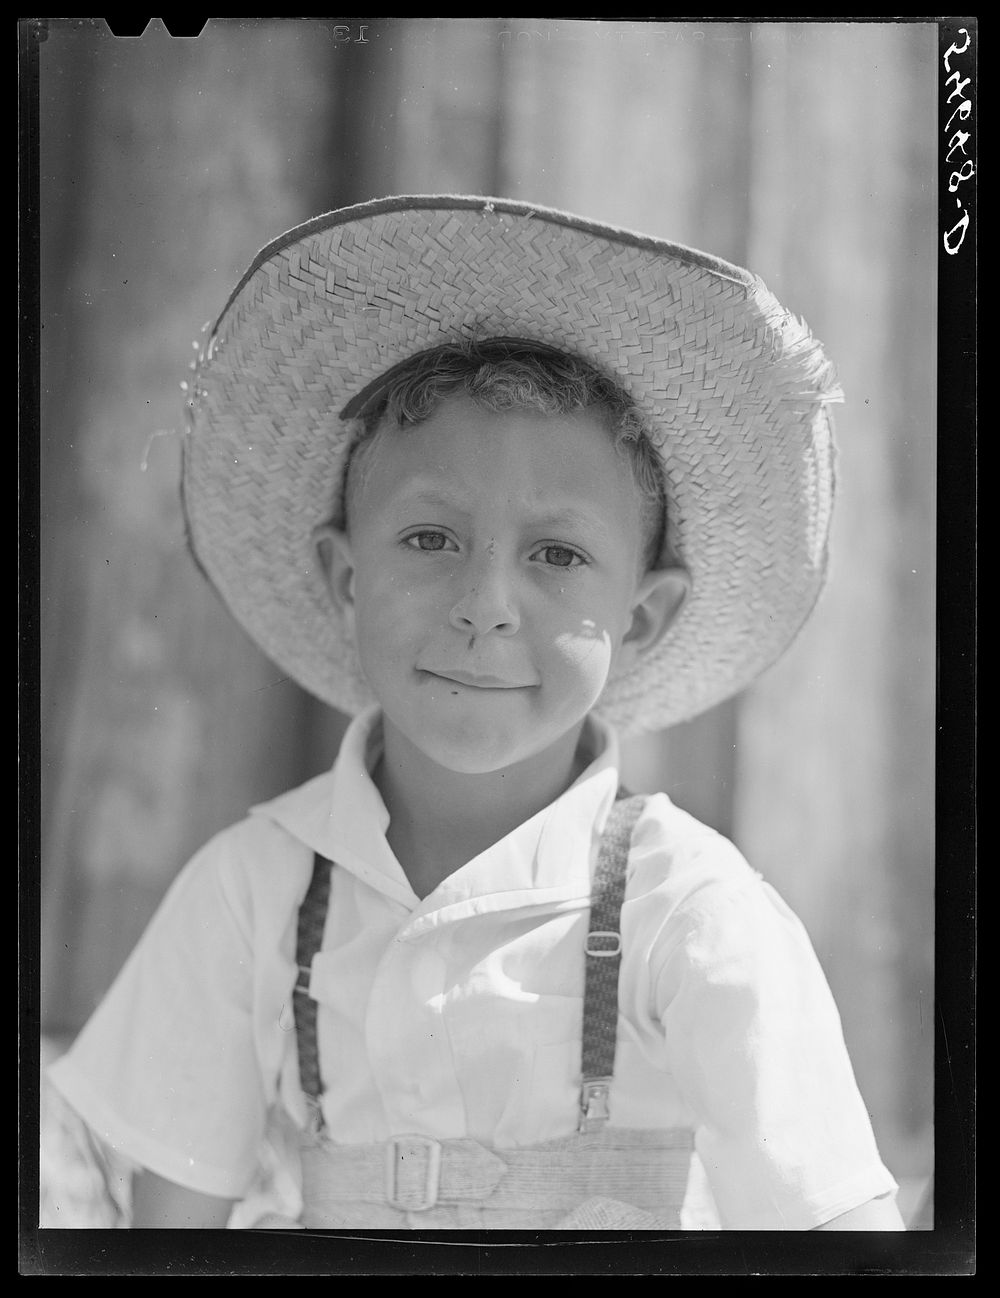 Melrose, Natchitoches Parish, Louisiana. Son of mulatto servant on John Henry cotton plantation. Sourced from the Library of…